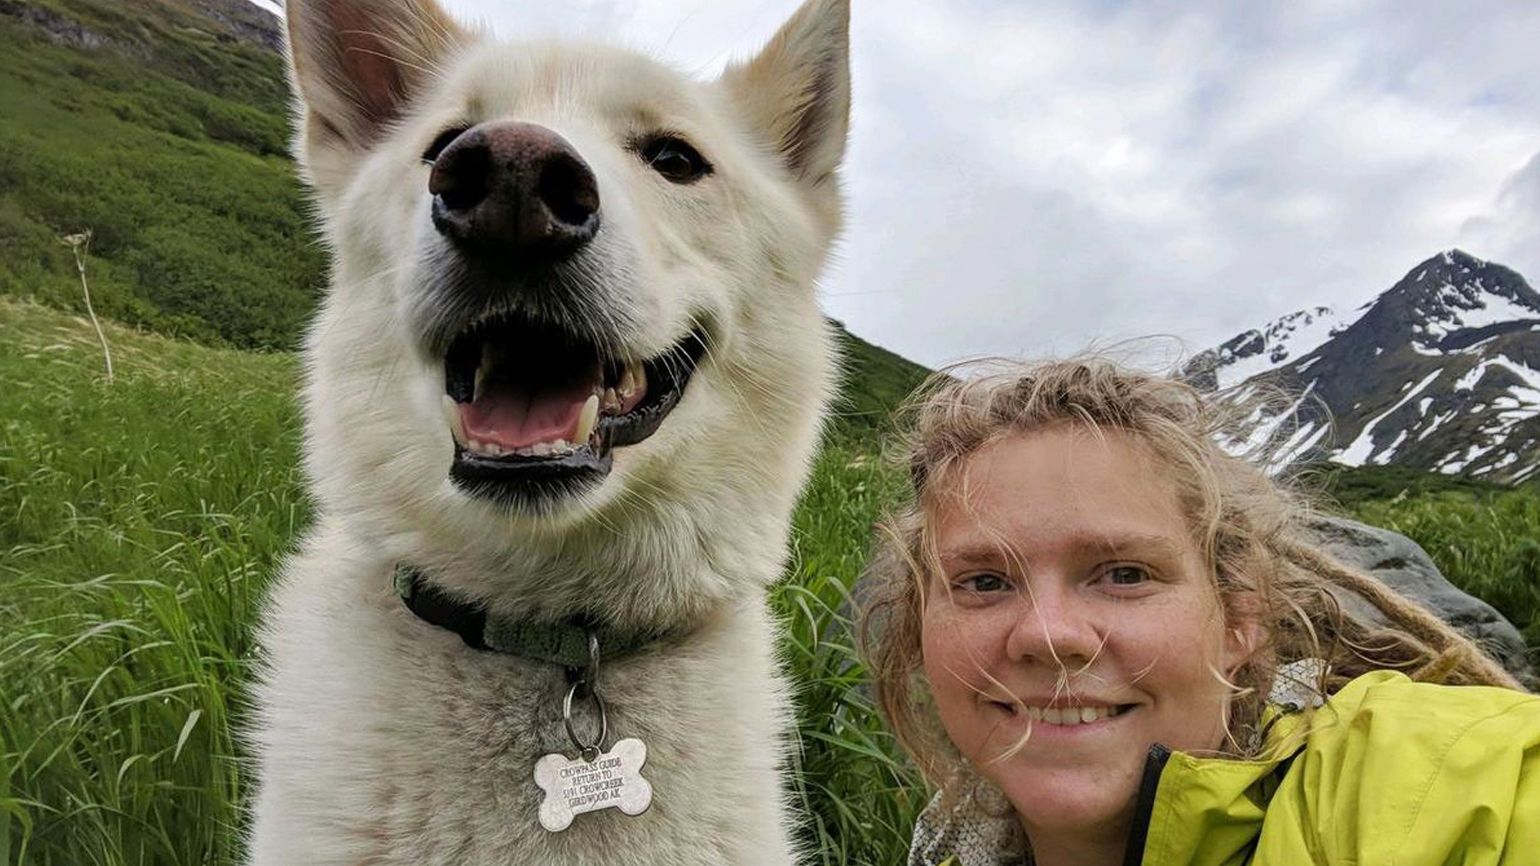 Nanook, a 7-year-old Alaskan husky, helped Amelia Milling when she fell during a hike through Crow Pass and then again crossing Eagle River near Anchorage, Alaska in June, 2018. Milling, 21, is deaf, and was on a 3-day hike 30 miles south of Anchorage. Alaska, a few miles in, her hiking poles snapped, sending her 300 feet down the mountain.